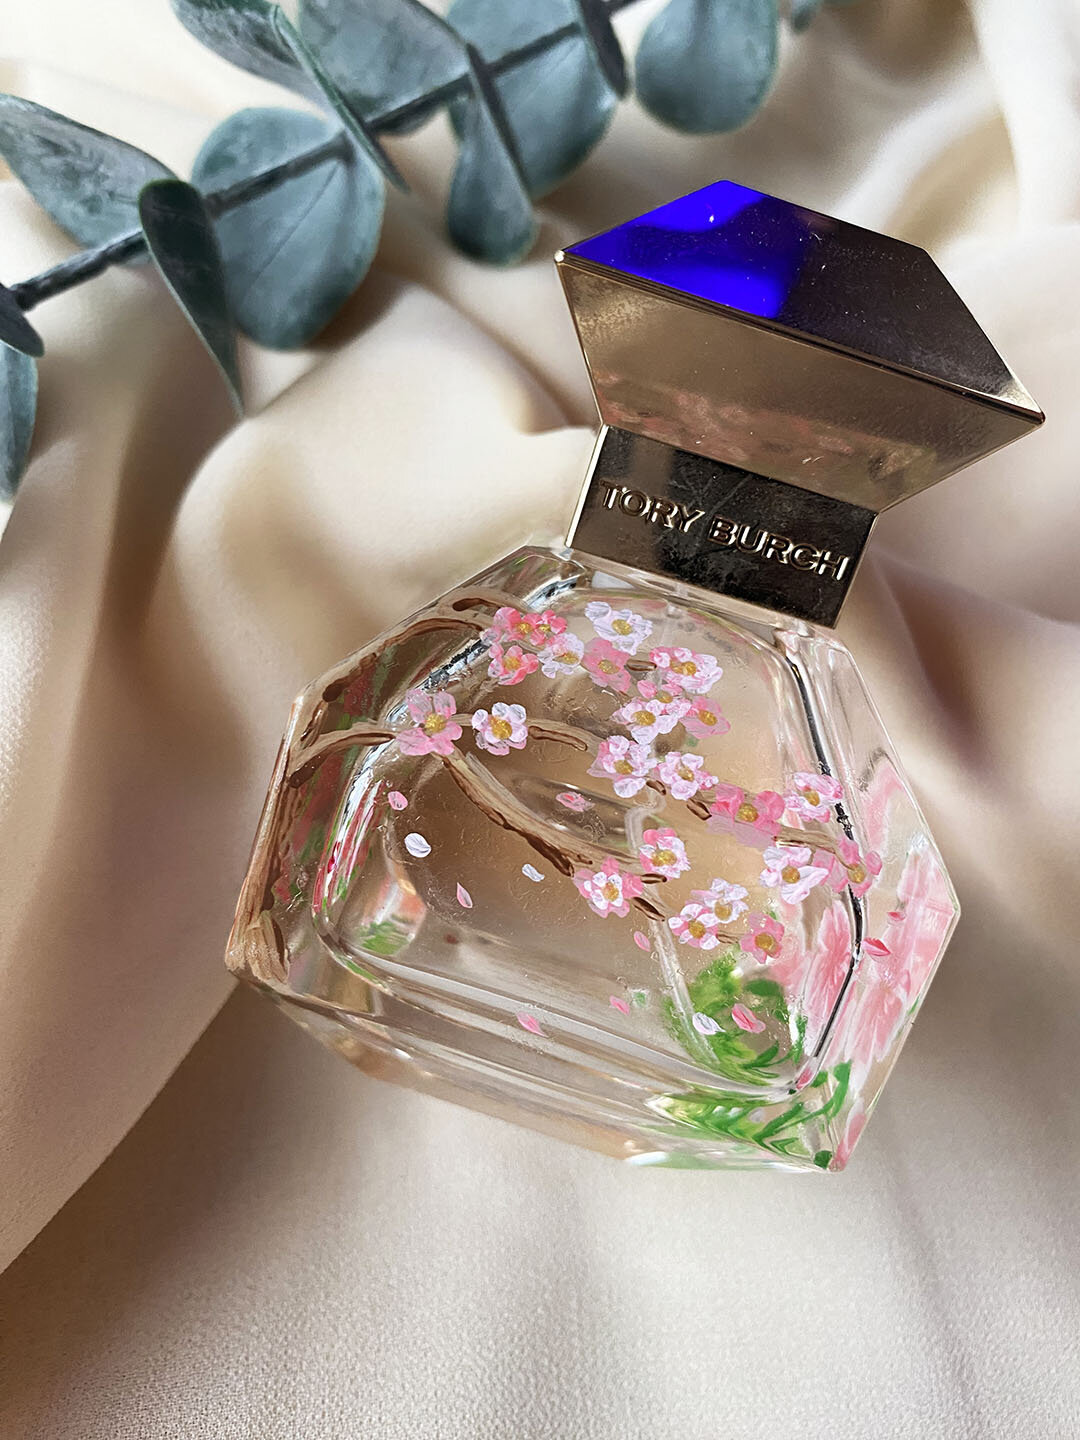 Los Angeles Artist Bottle Painted Cherry Blossom on Tory Burch Perfume